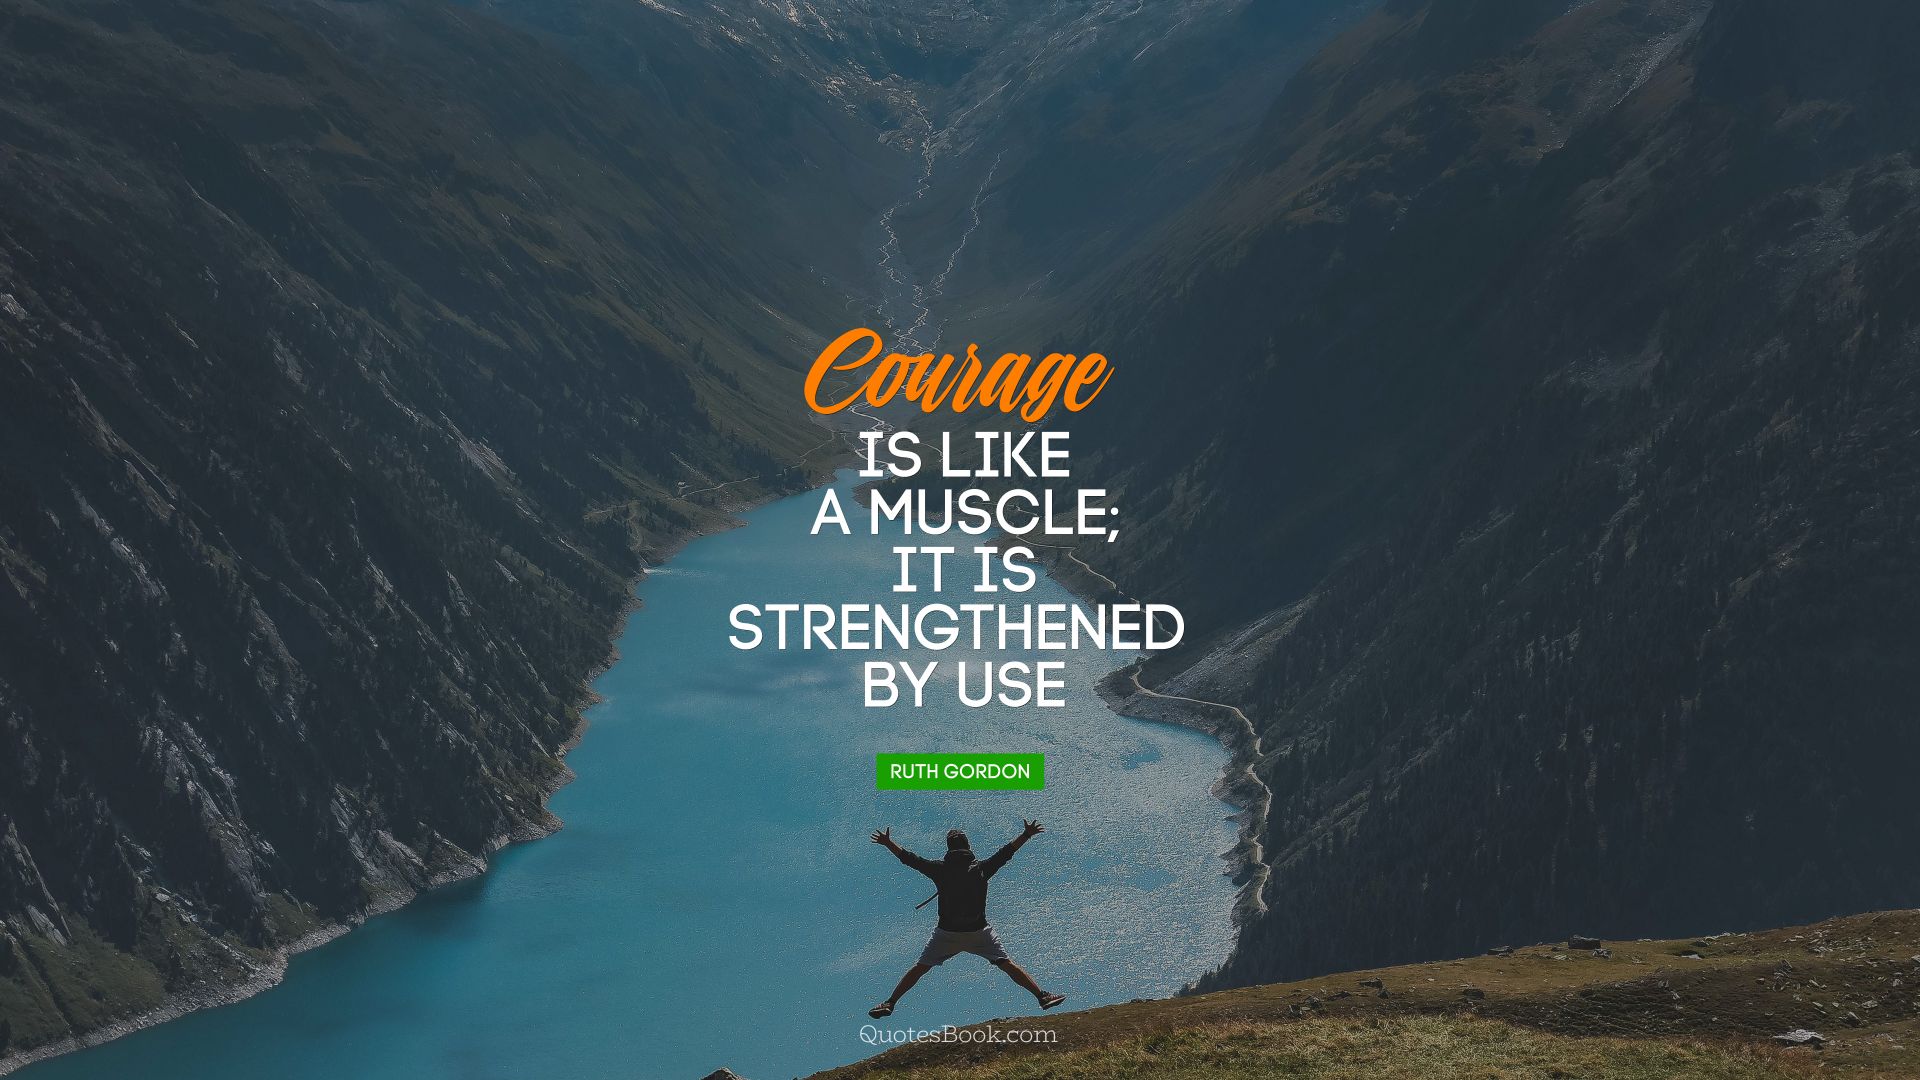 Courage is like a muscle; it is strengthened 
by use. - Quote by Ruth Gordon